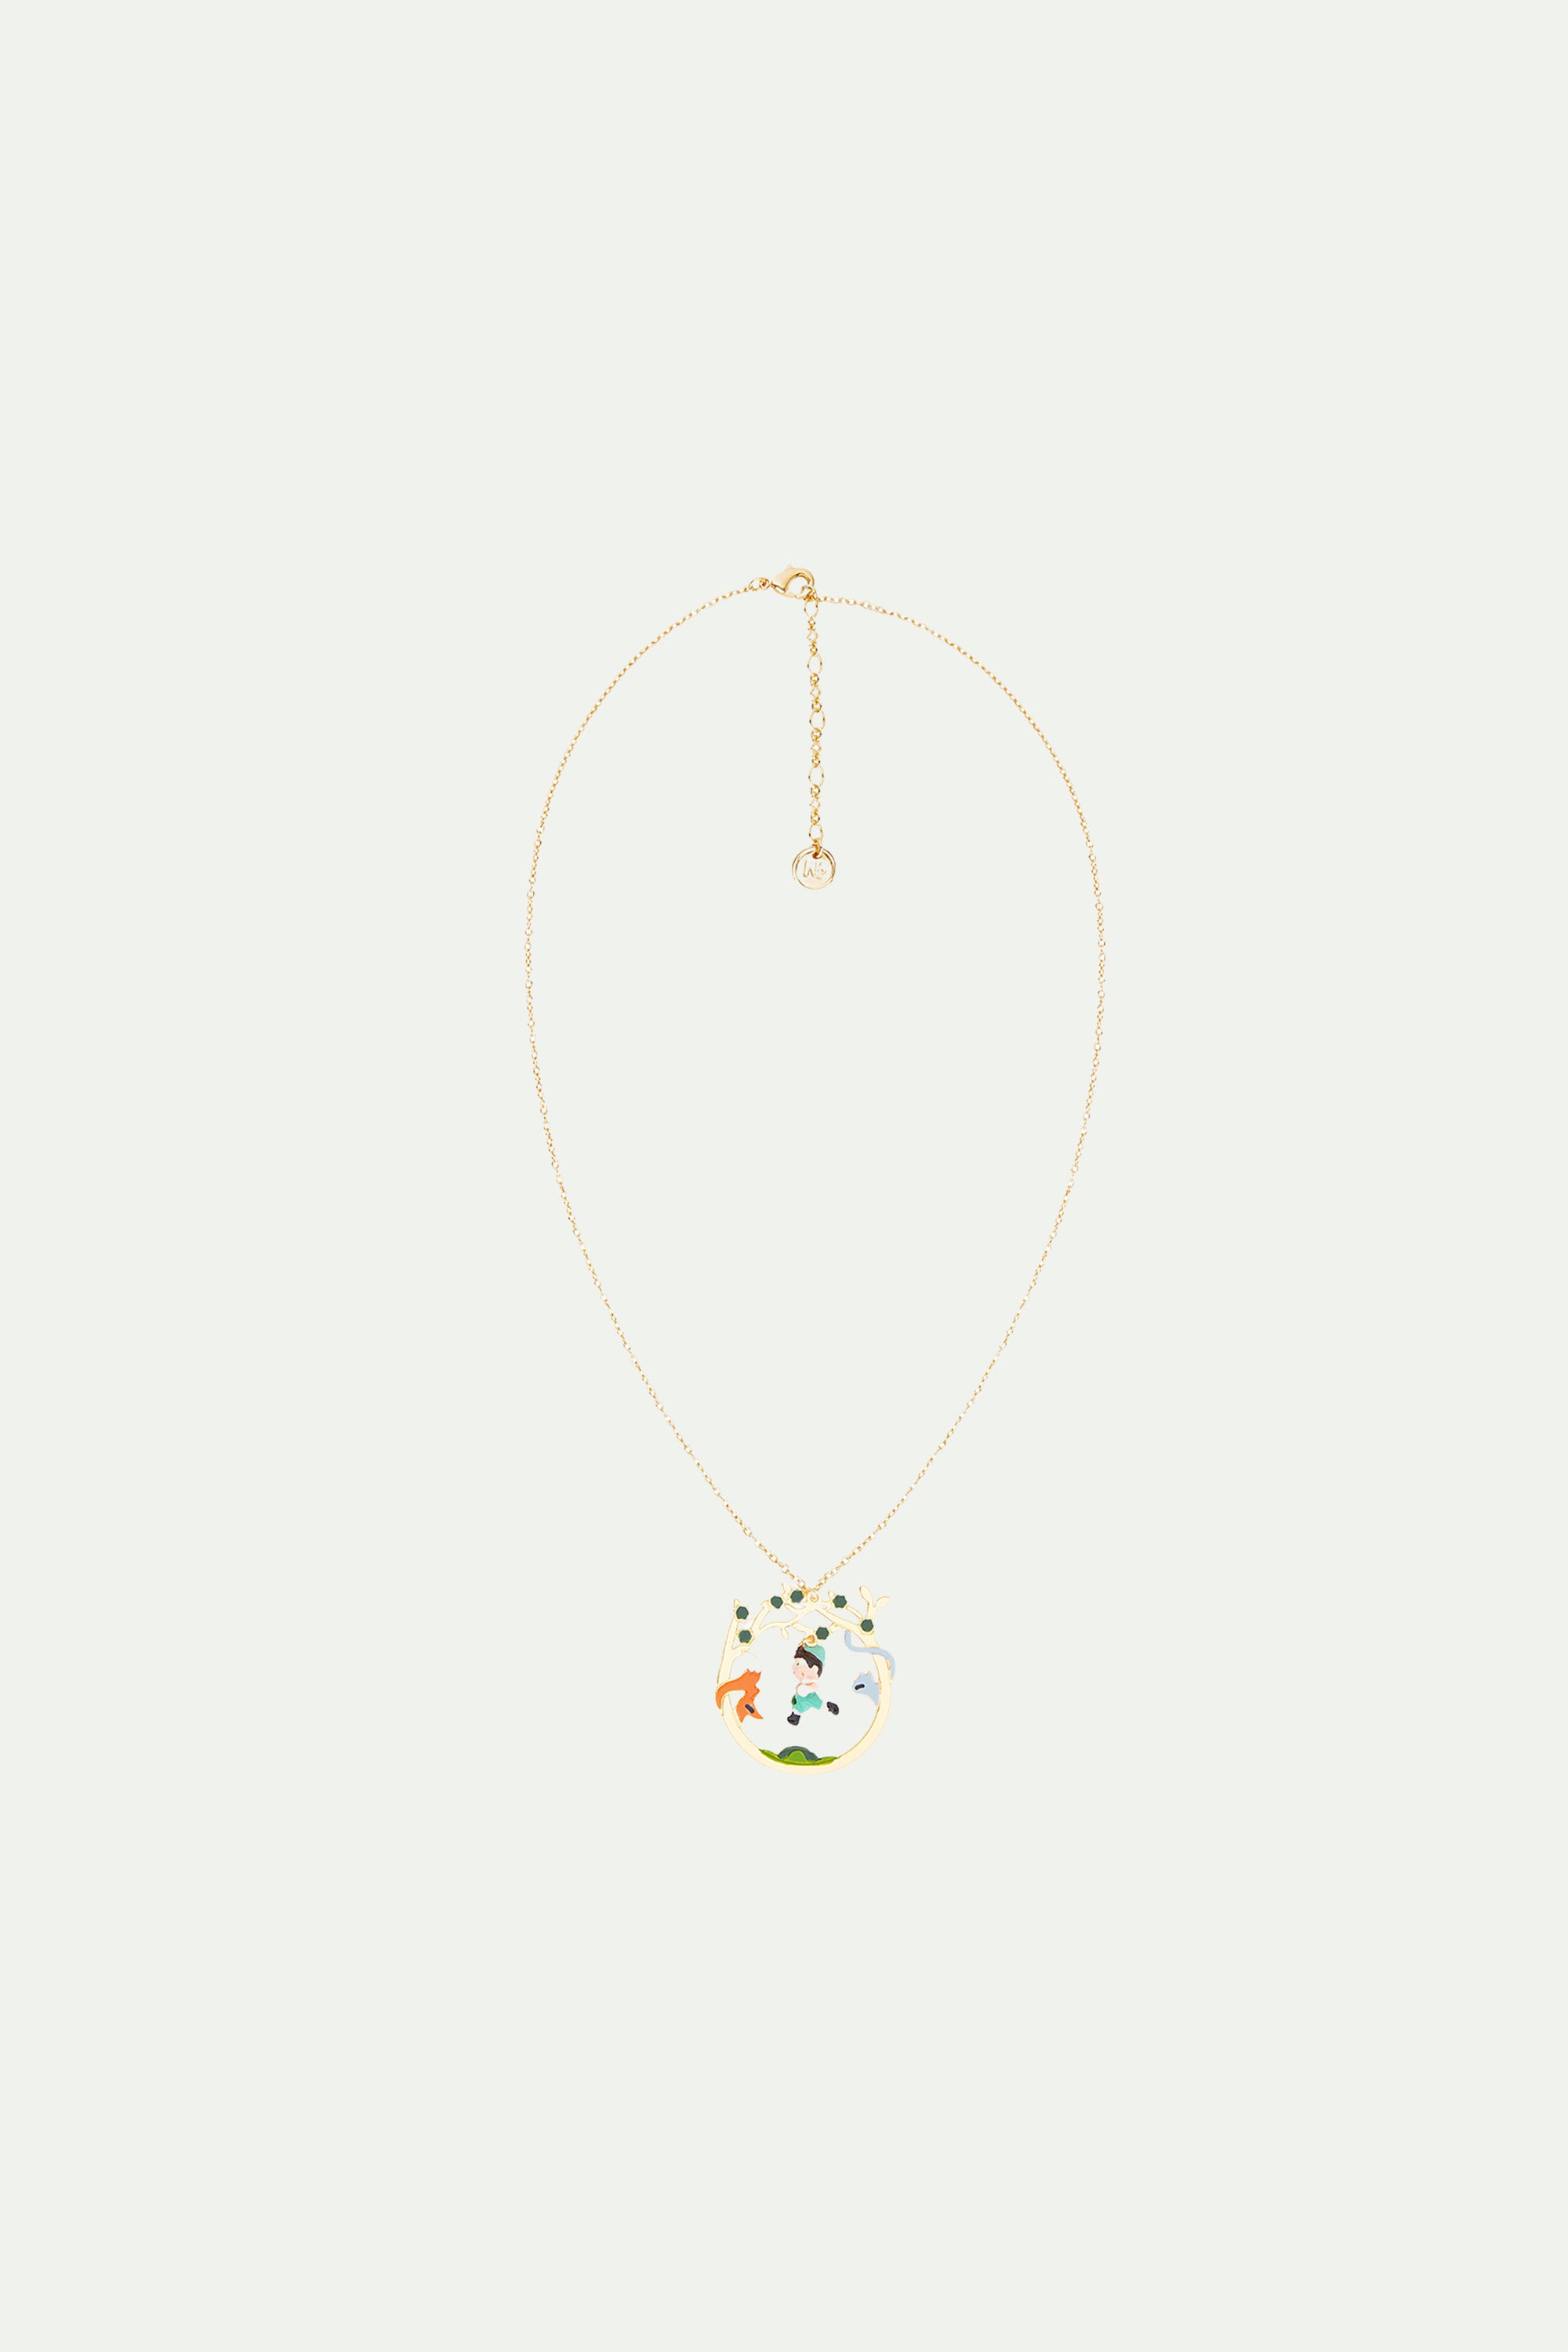 Pinocchio and friends in the forest necklace